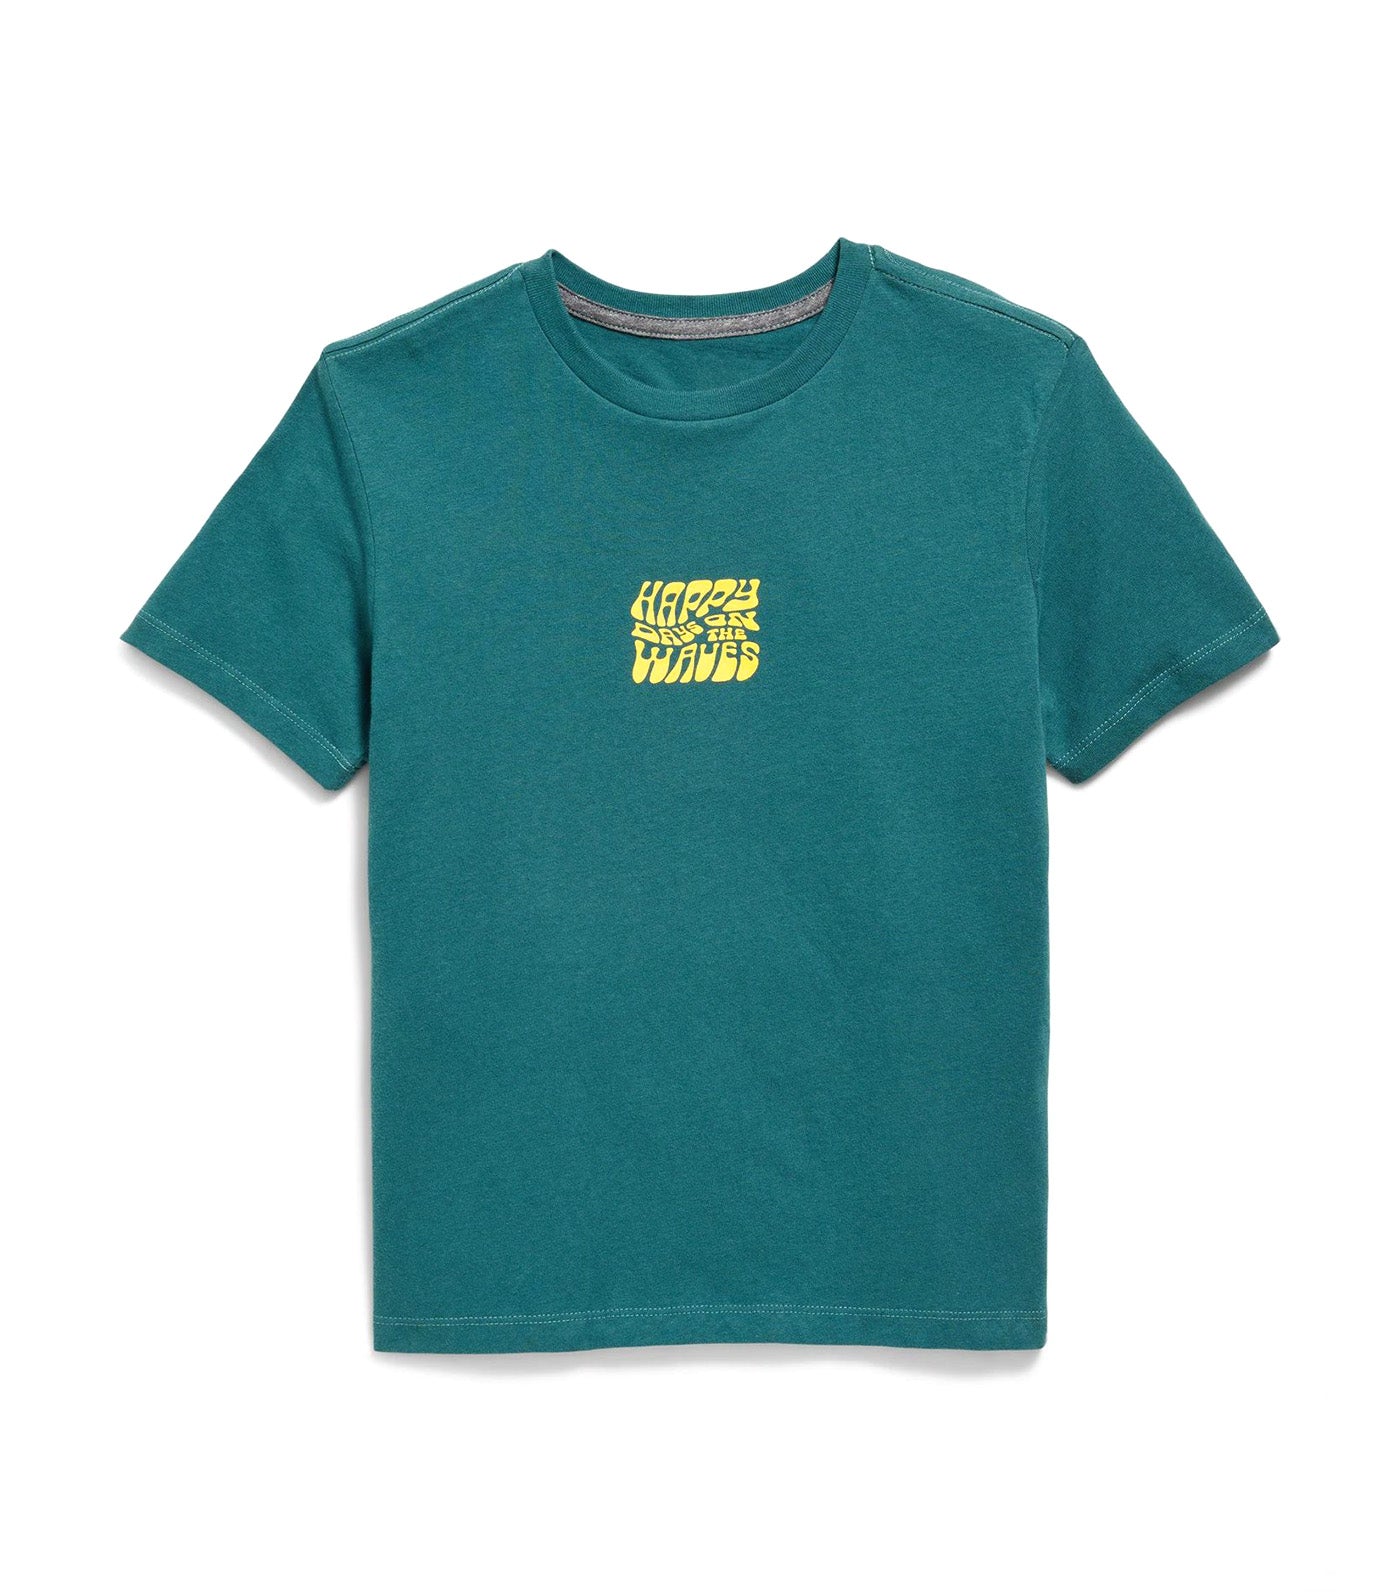 Short-Sleeve Graphic T-Shirt for Boys Darkwater Teal